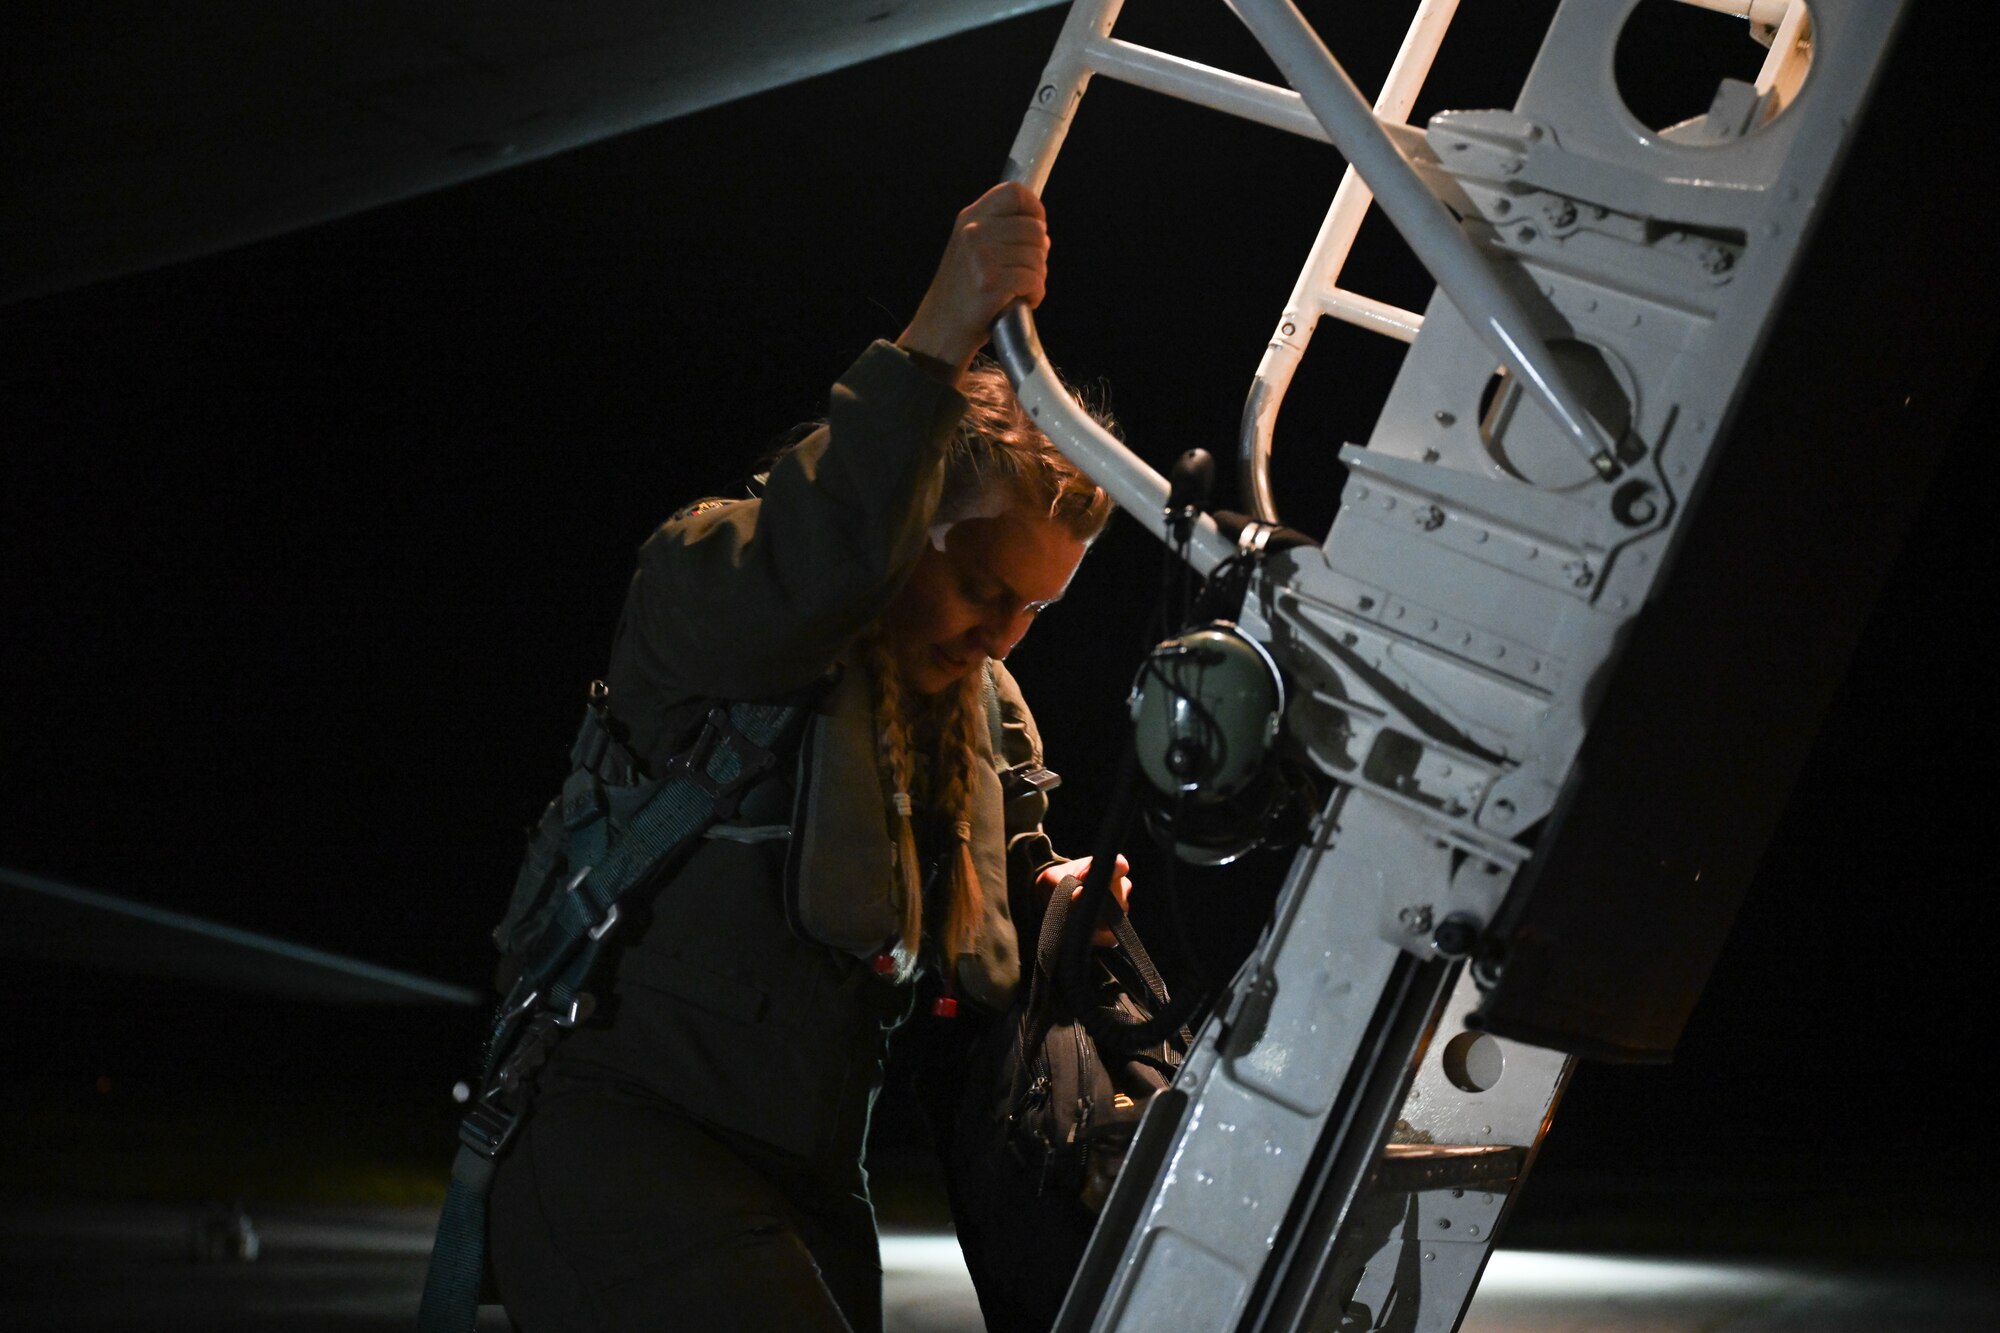 U.S. Air Force Capt. Sarah Brandt, an instructor weapon systems operator assigned to the 37th Expeditionary Bomb Squadron, Ellsworth Air Force Base, South Dakota, exits a B-1B Lancer after a Bomber Task Force mission at Andersen AFB, Guam, Nov. 14, 2022. BTF missions are designed to showcase Pacific Air Force’s ability to deter, deny and dominate any influence or aggression from adversaries or competitors. (U.S. Air Force photo by Staff Sgt. Hannah Malone)